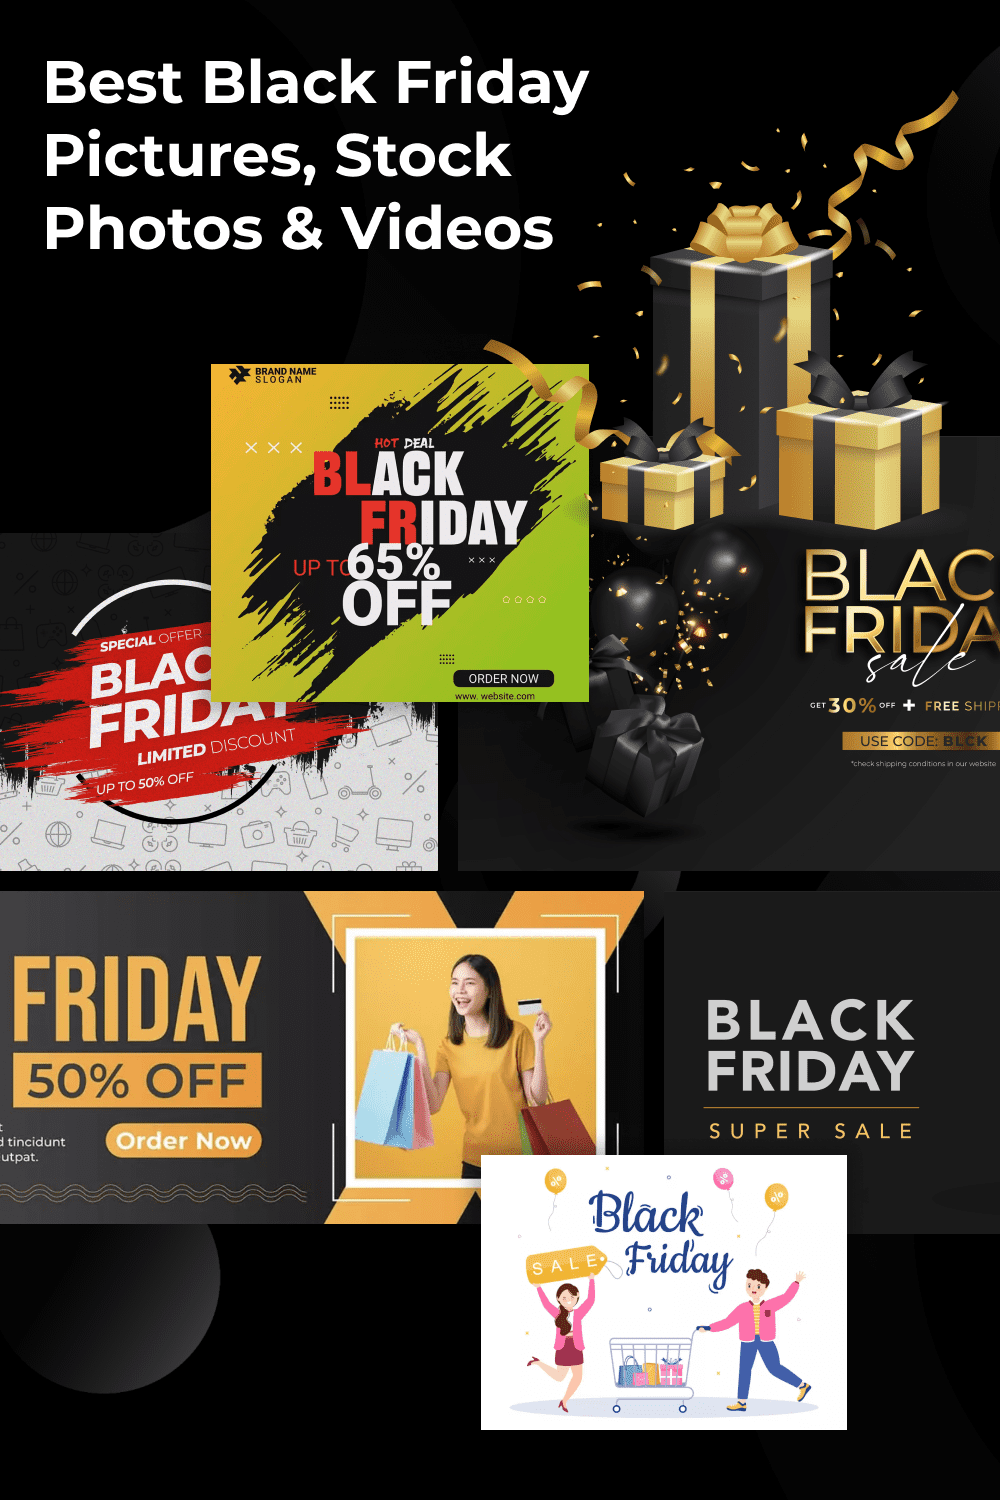 best black friday pictures stock photos videos pinterest 406